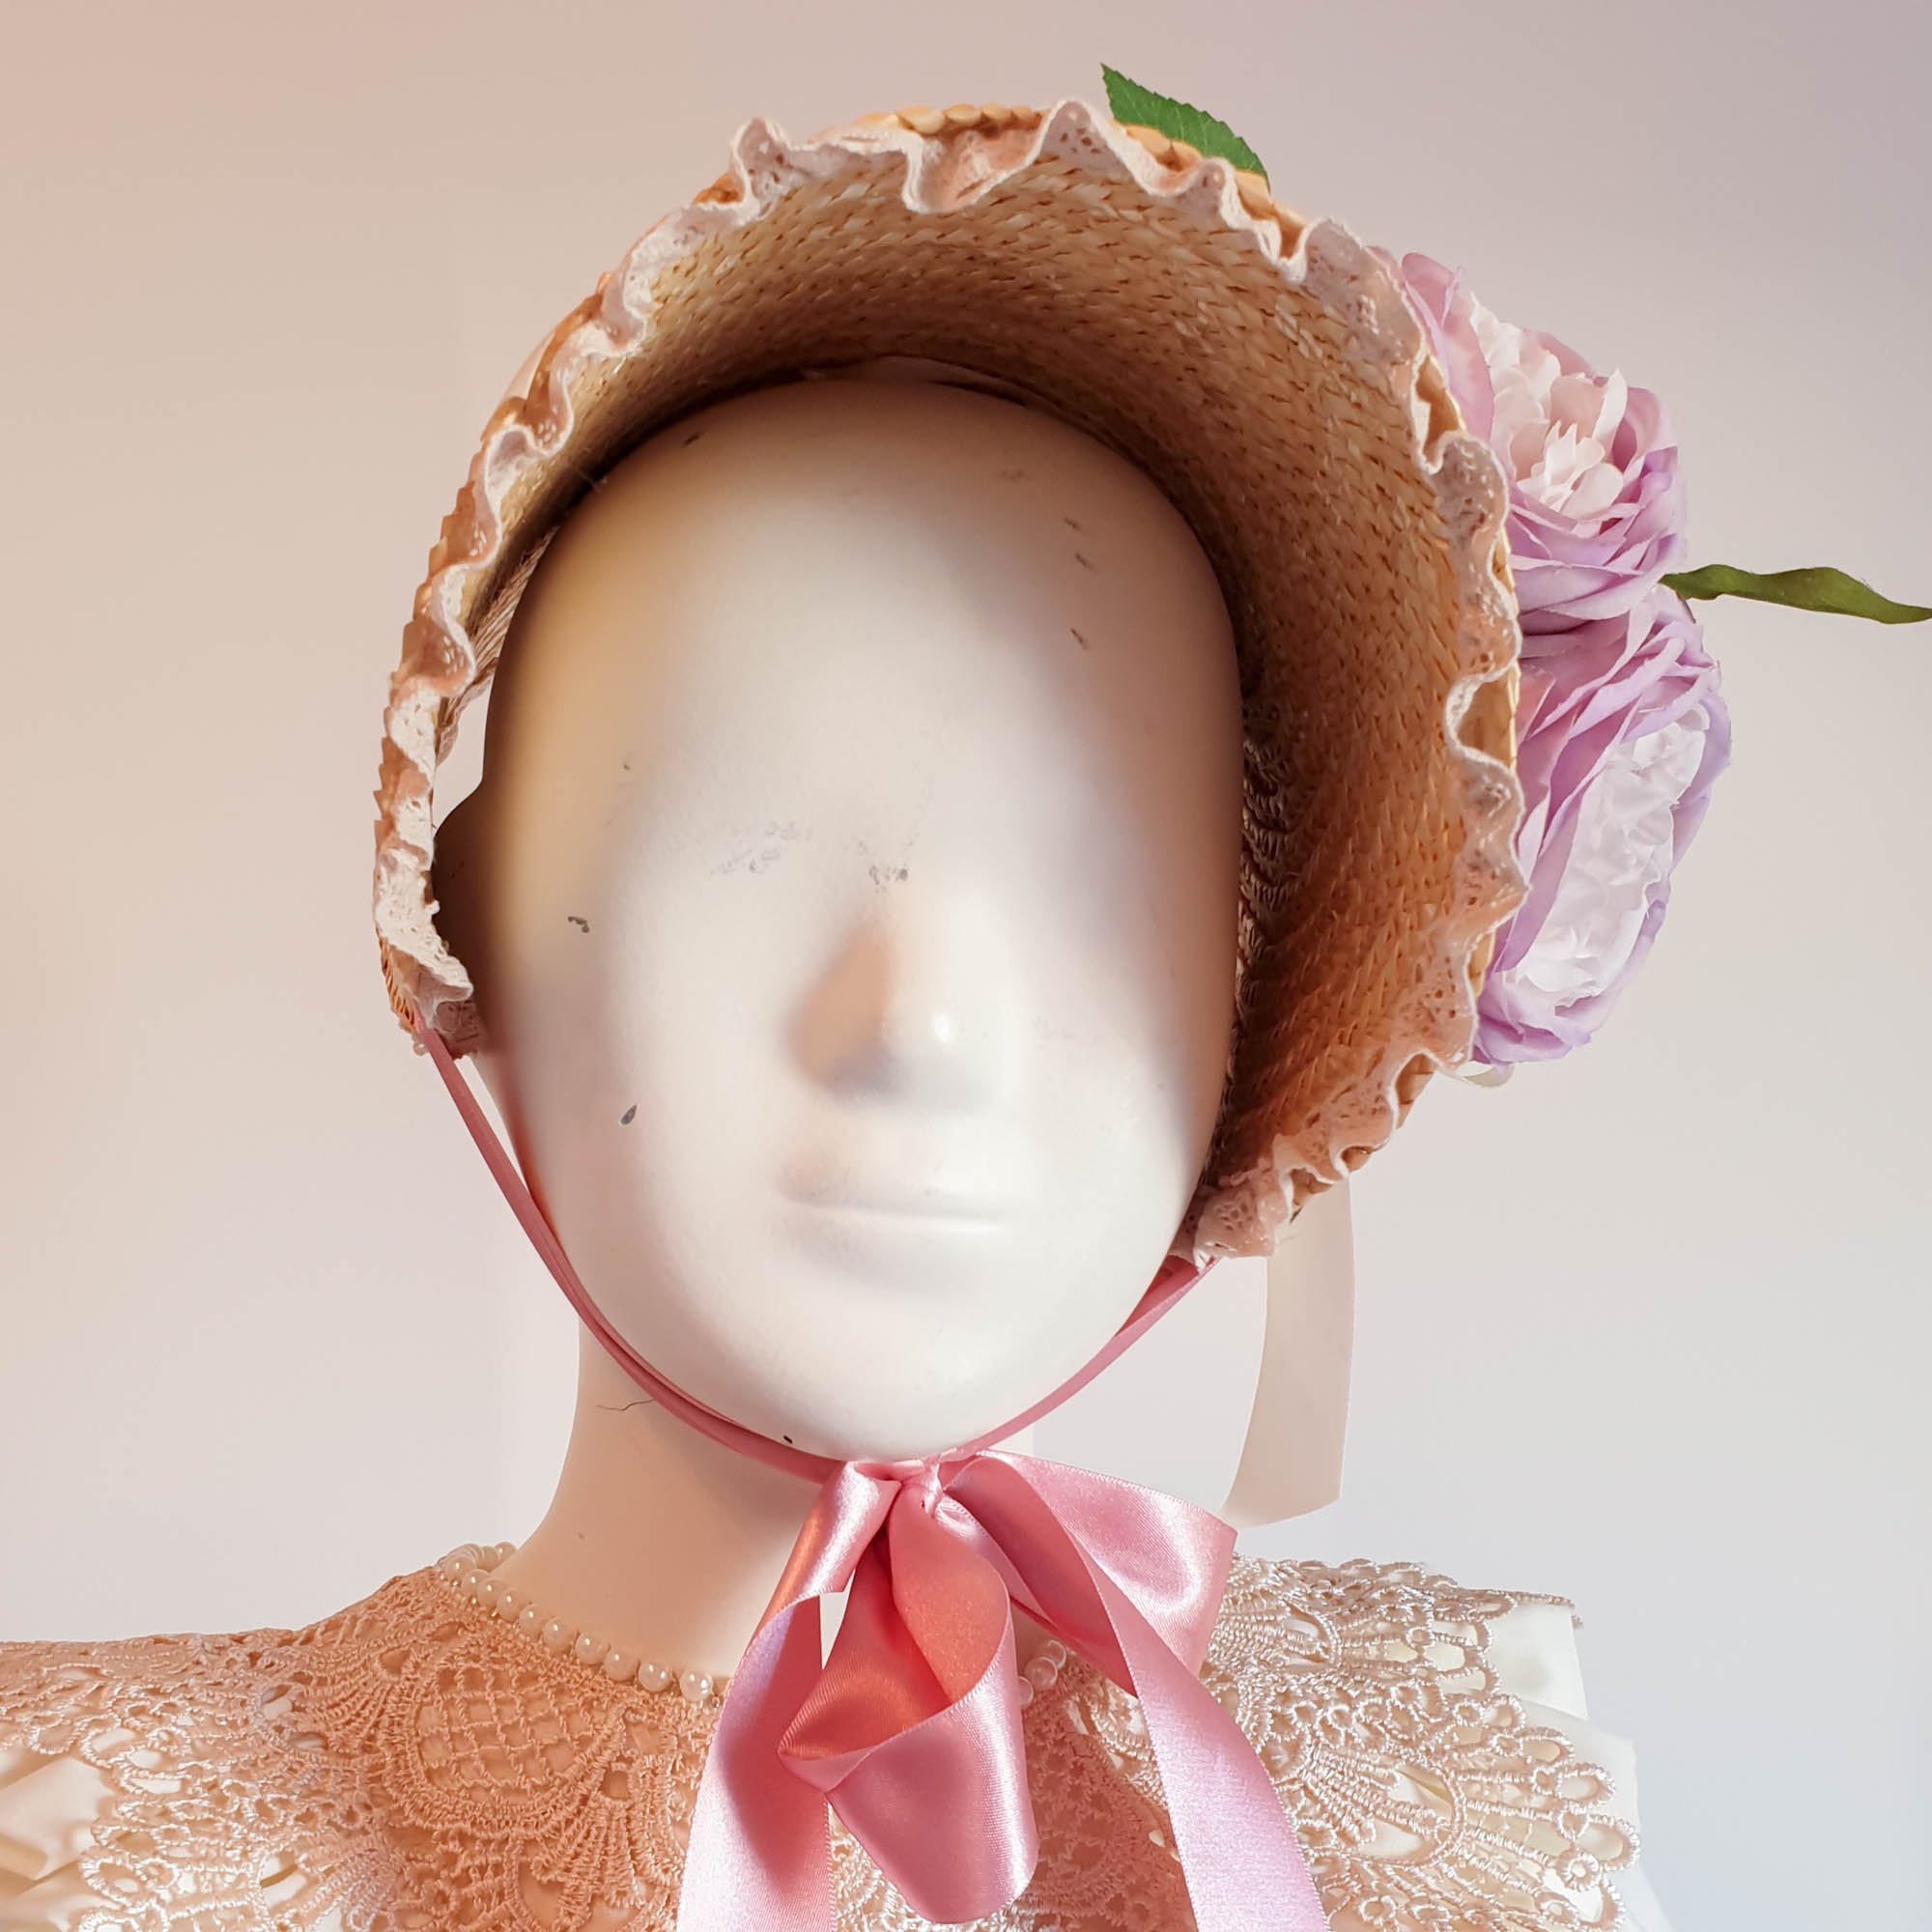 Jane Austen bonnet with lace and flowers